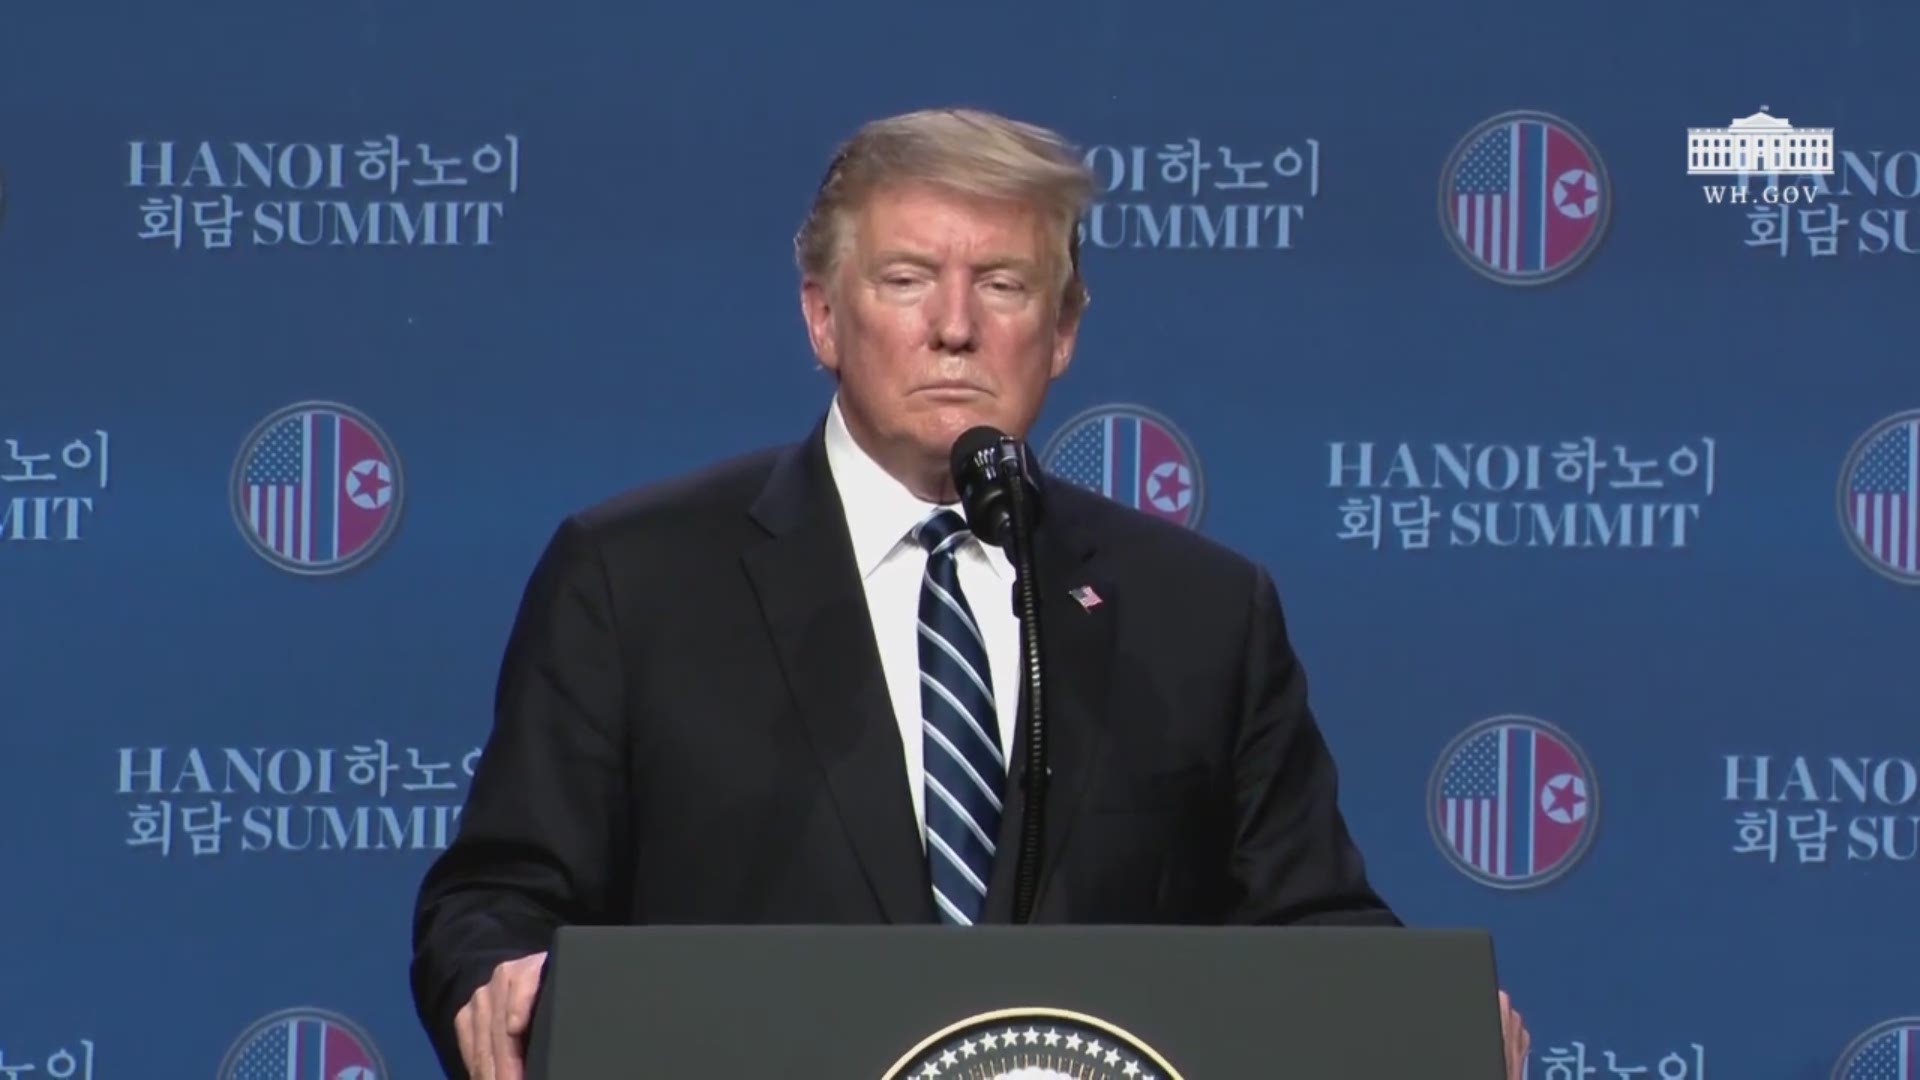 Trump says of Kim: 'He tells me that he didn't know about it, and I will take him at his word.'